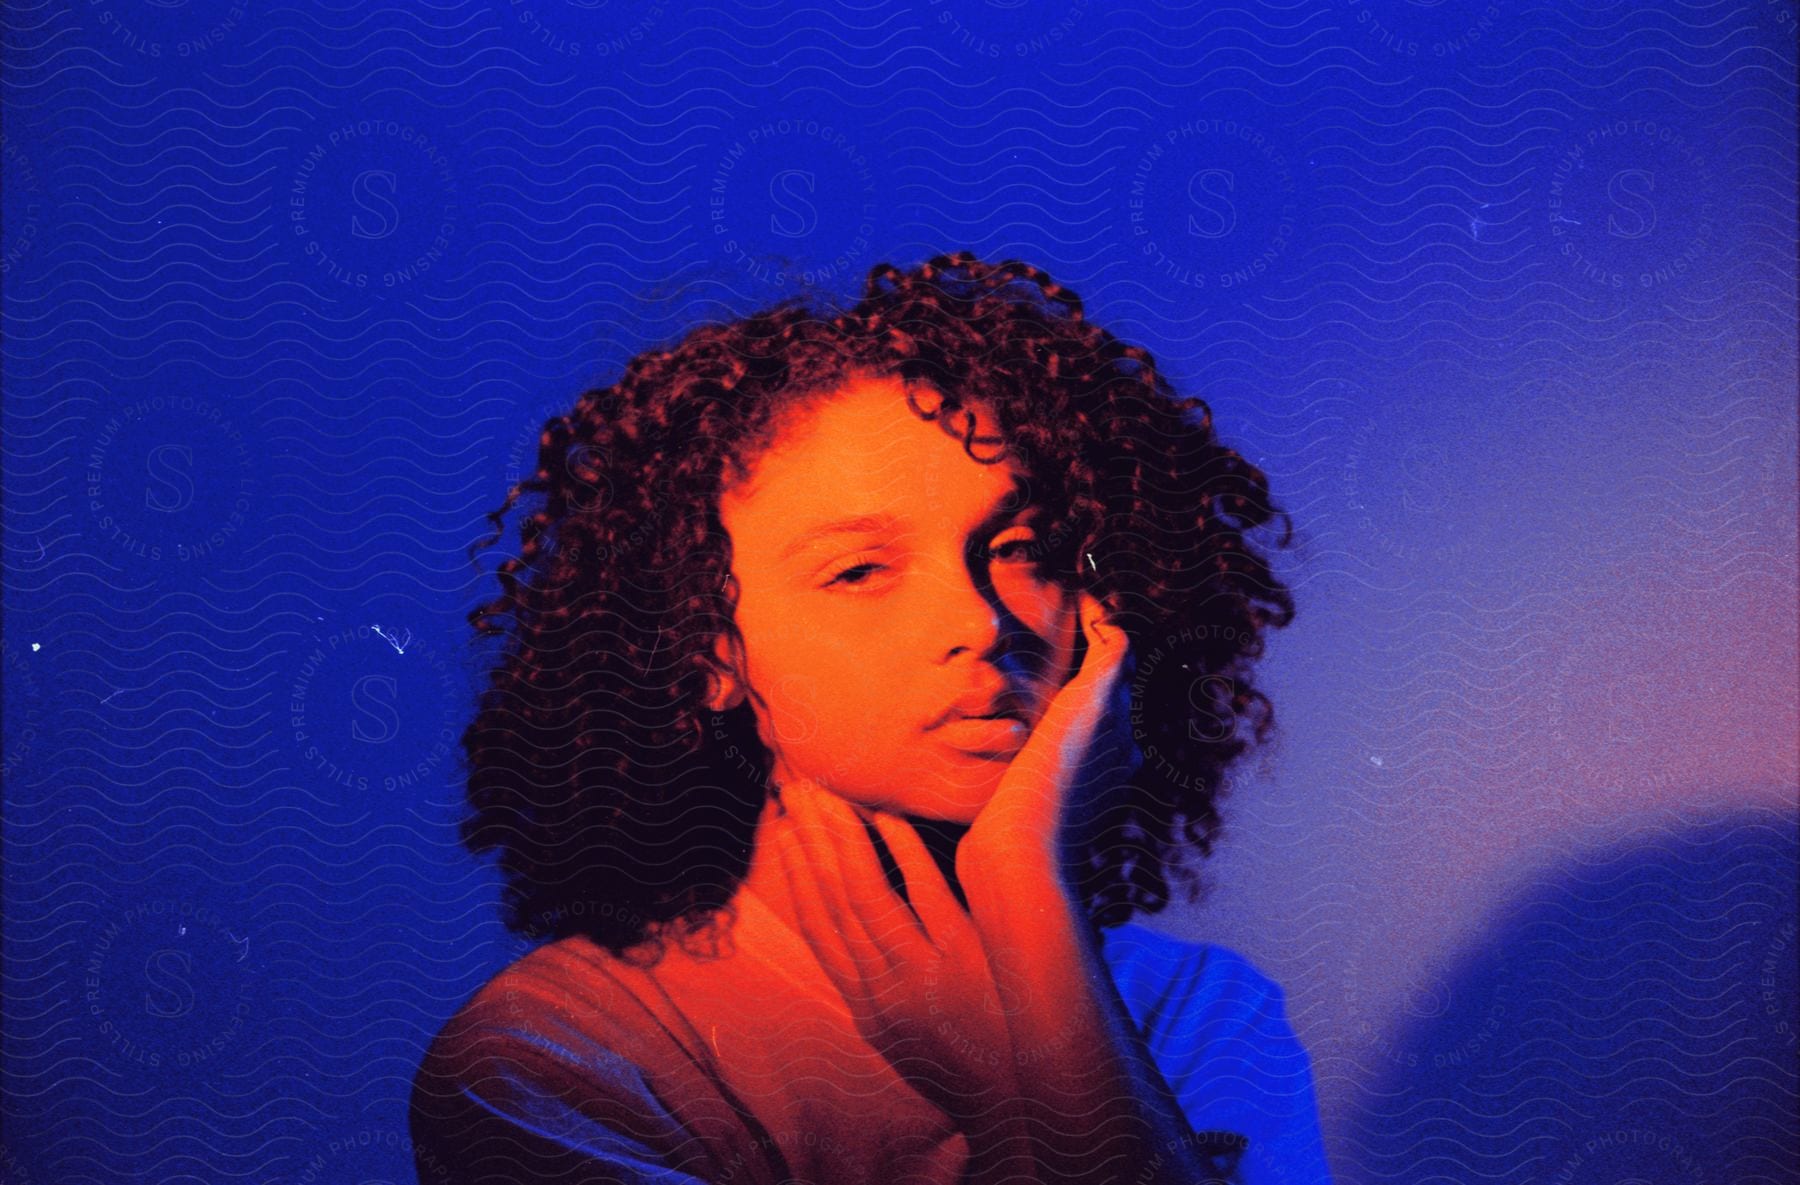 Young woman posing with her hands on her face against a blue background